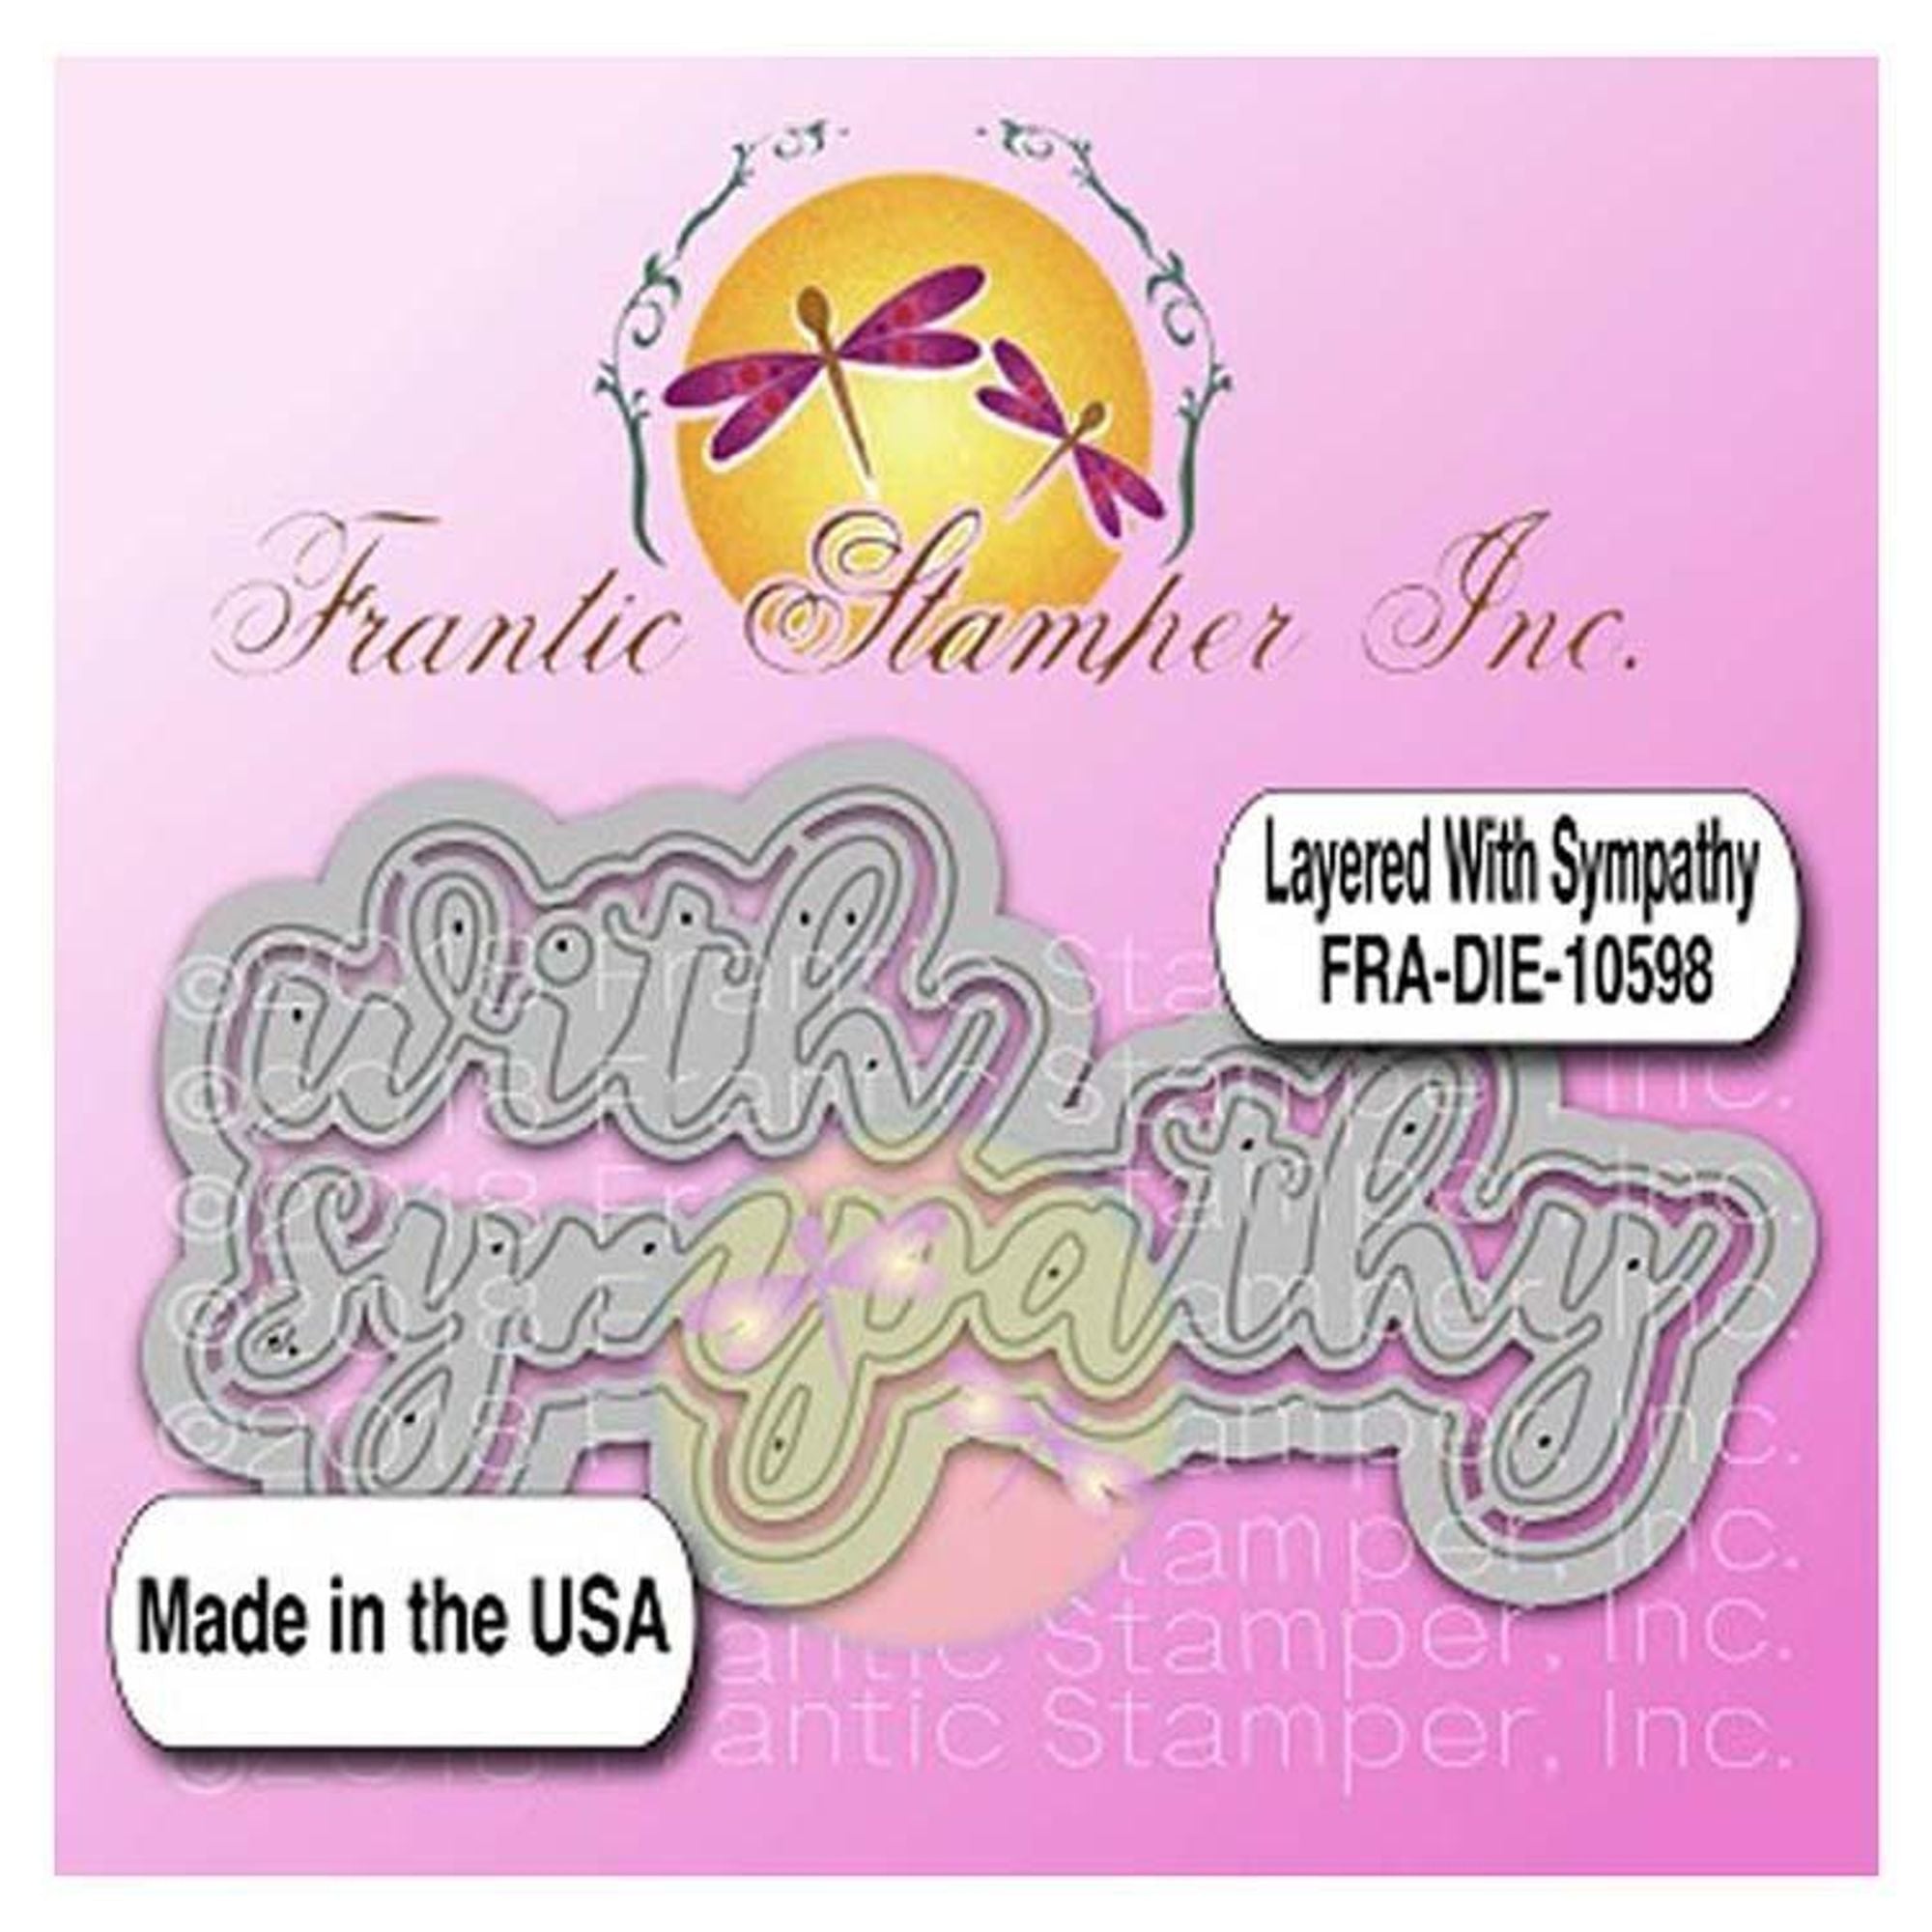 Frantic Stamper Precision Die - Layered With Sympathy